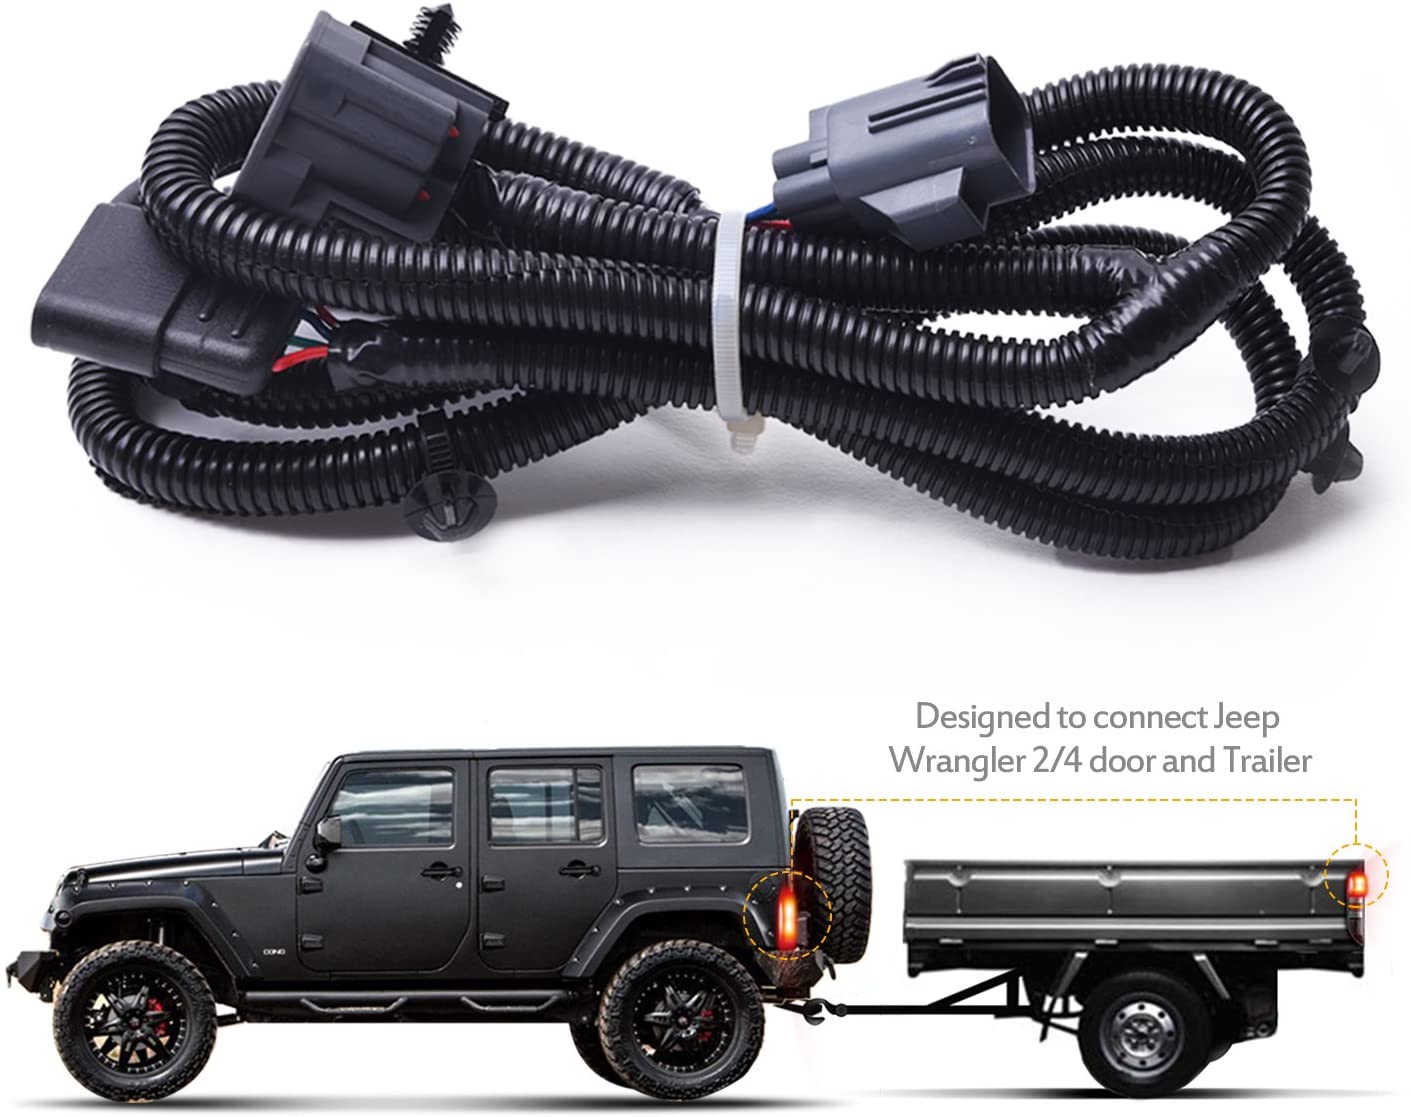 65'' Trailer Hitch Wiring Harness Kit with 4-Way Flat Connector Compatible with 07-18 Jep Wrangler JK 2/4 Door